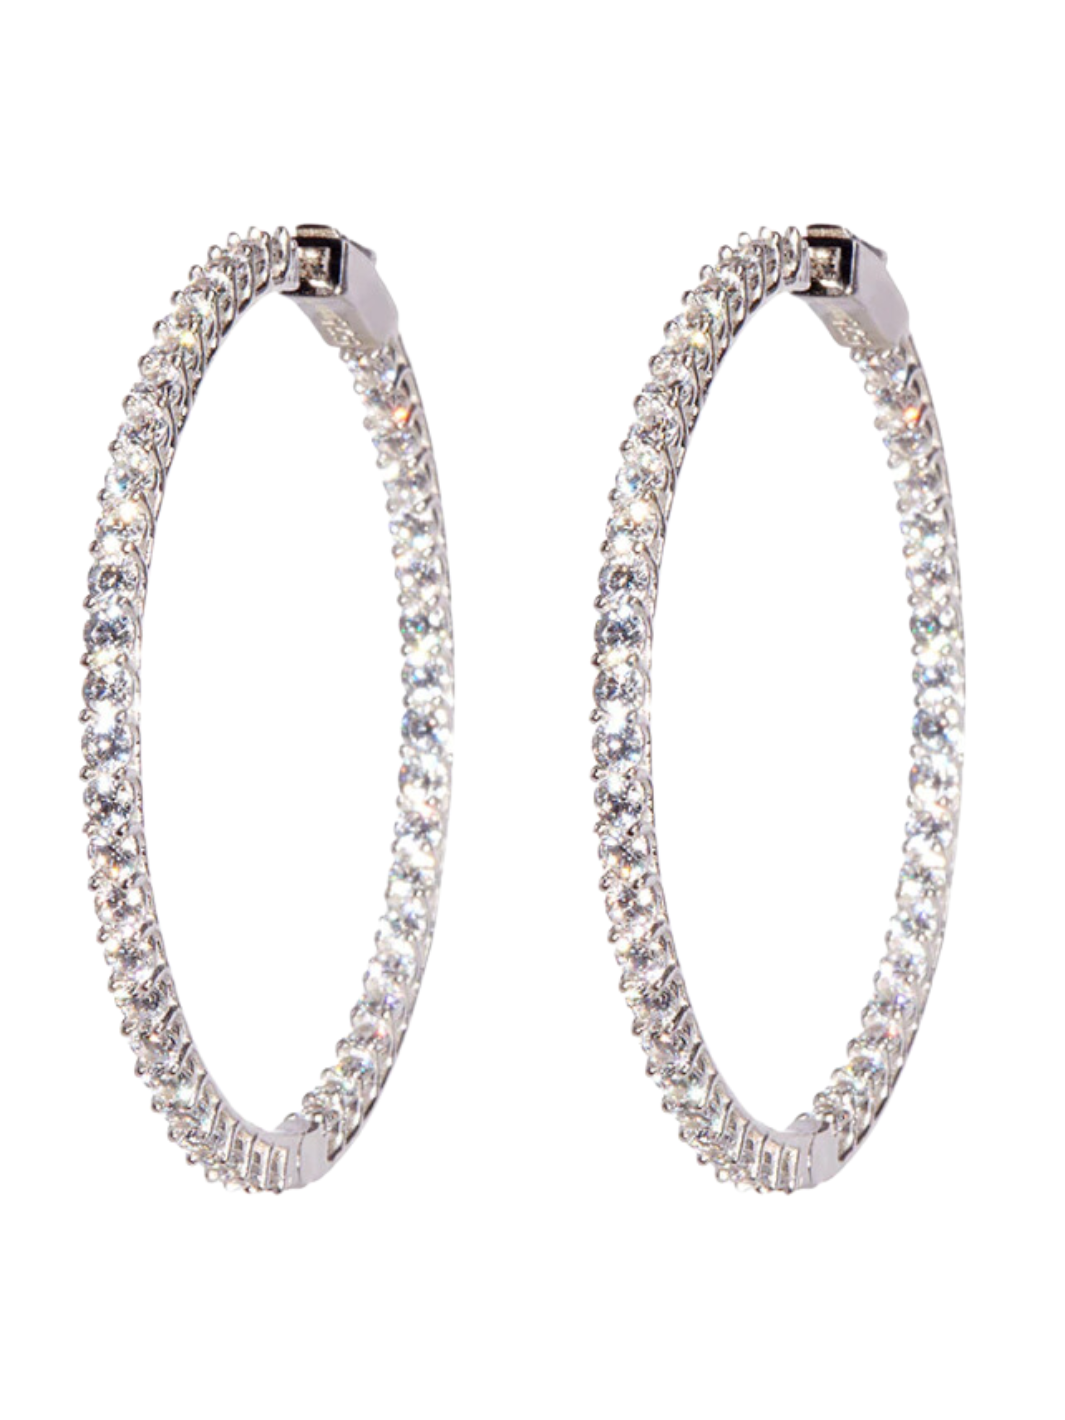 KAY LEE HOOPS IN WHITE RHODIUM - Romi Boutique